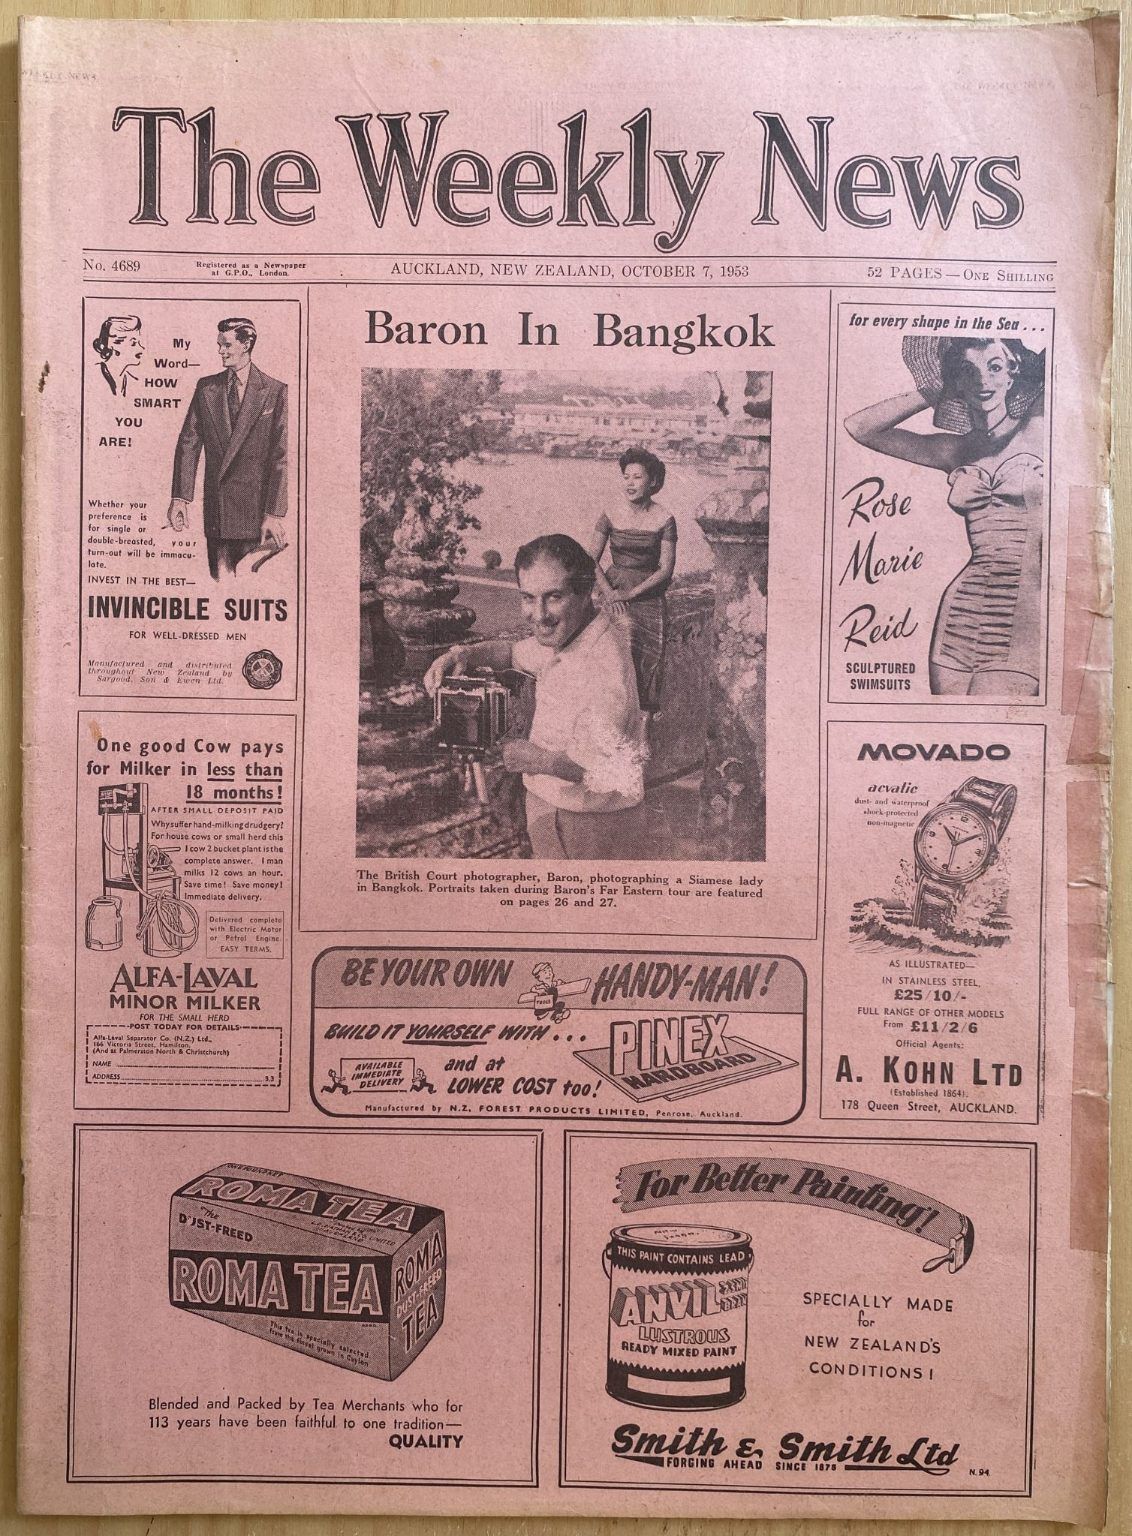 OLD NEWSPAPER: The Weekly News - No. 4689, 7 October 1953